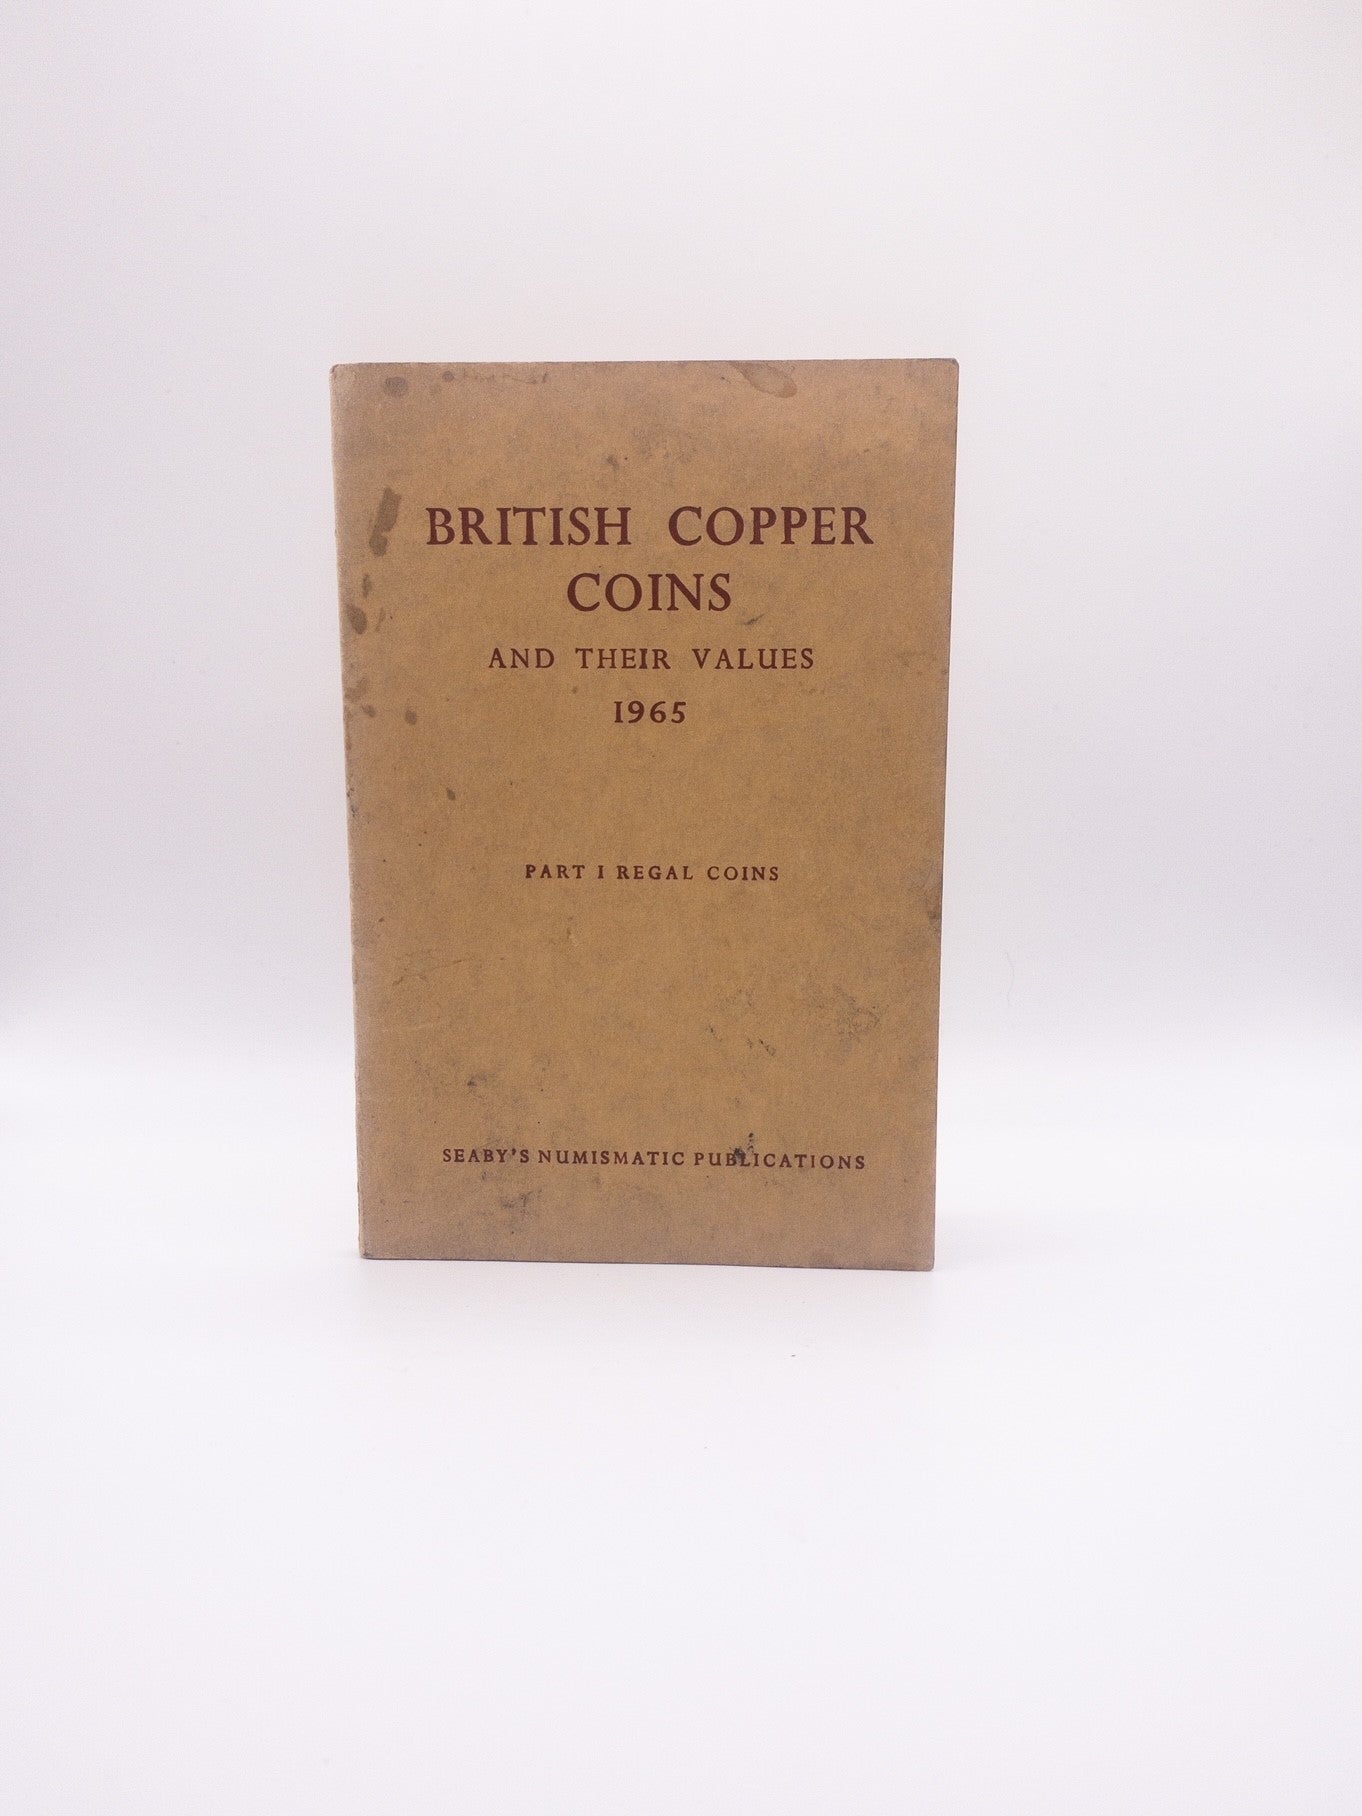 British Copper Coins and their Values 1965: Part 1: Regal Coins edited by H. A. Seaby and Monica Bussell